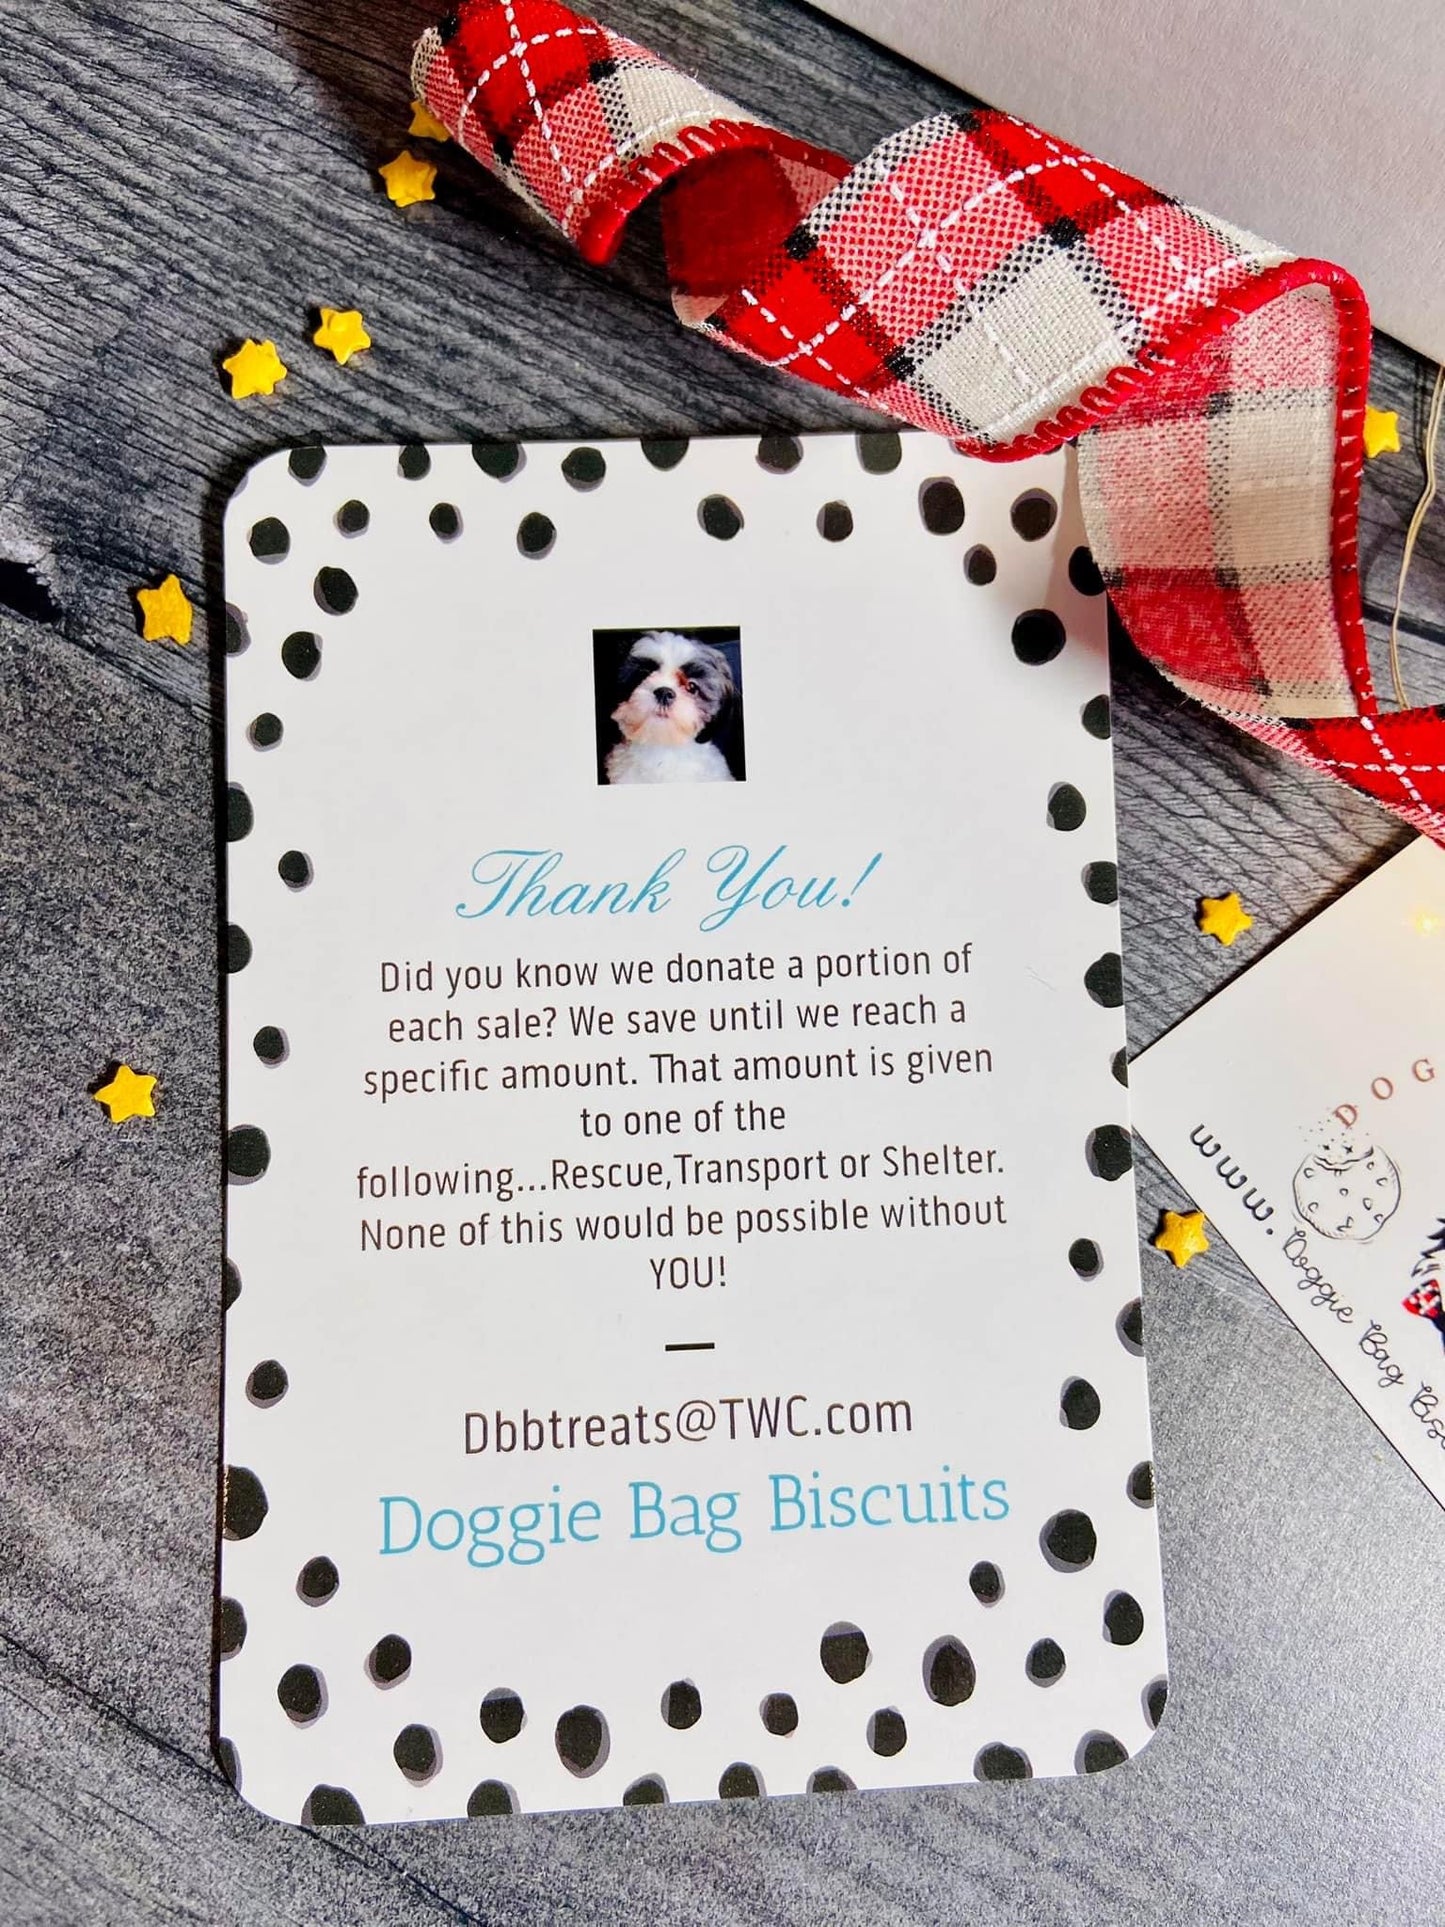 You’ve been Boo’d Canine Cookie Gift Sets: 4 Options Available